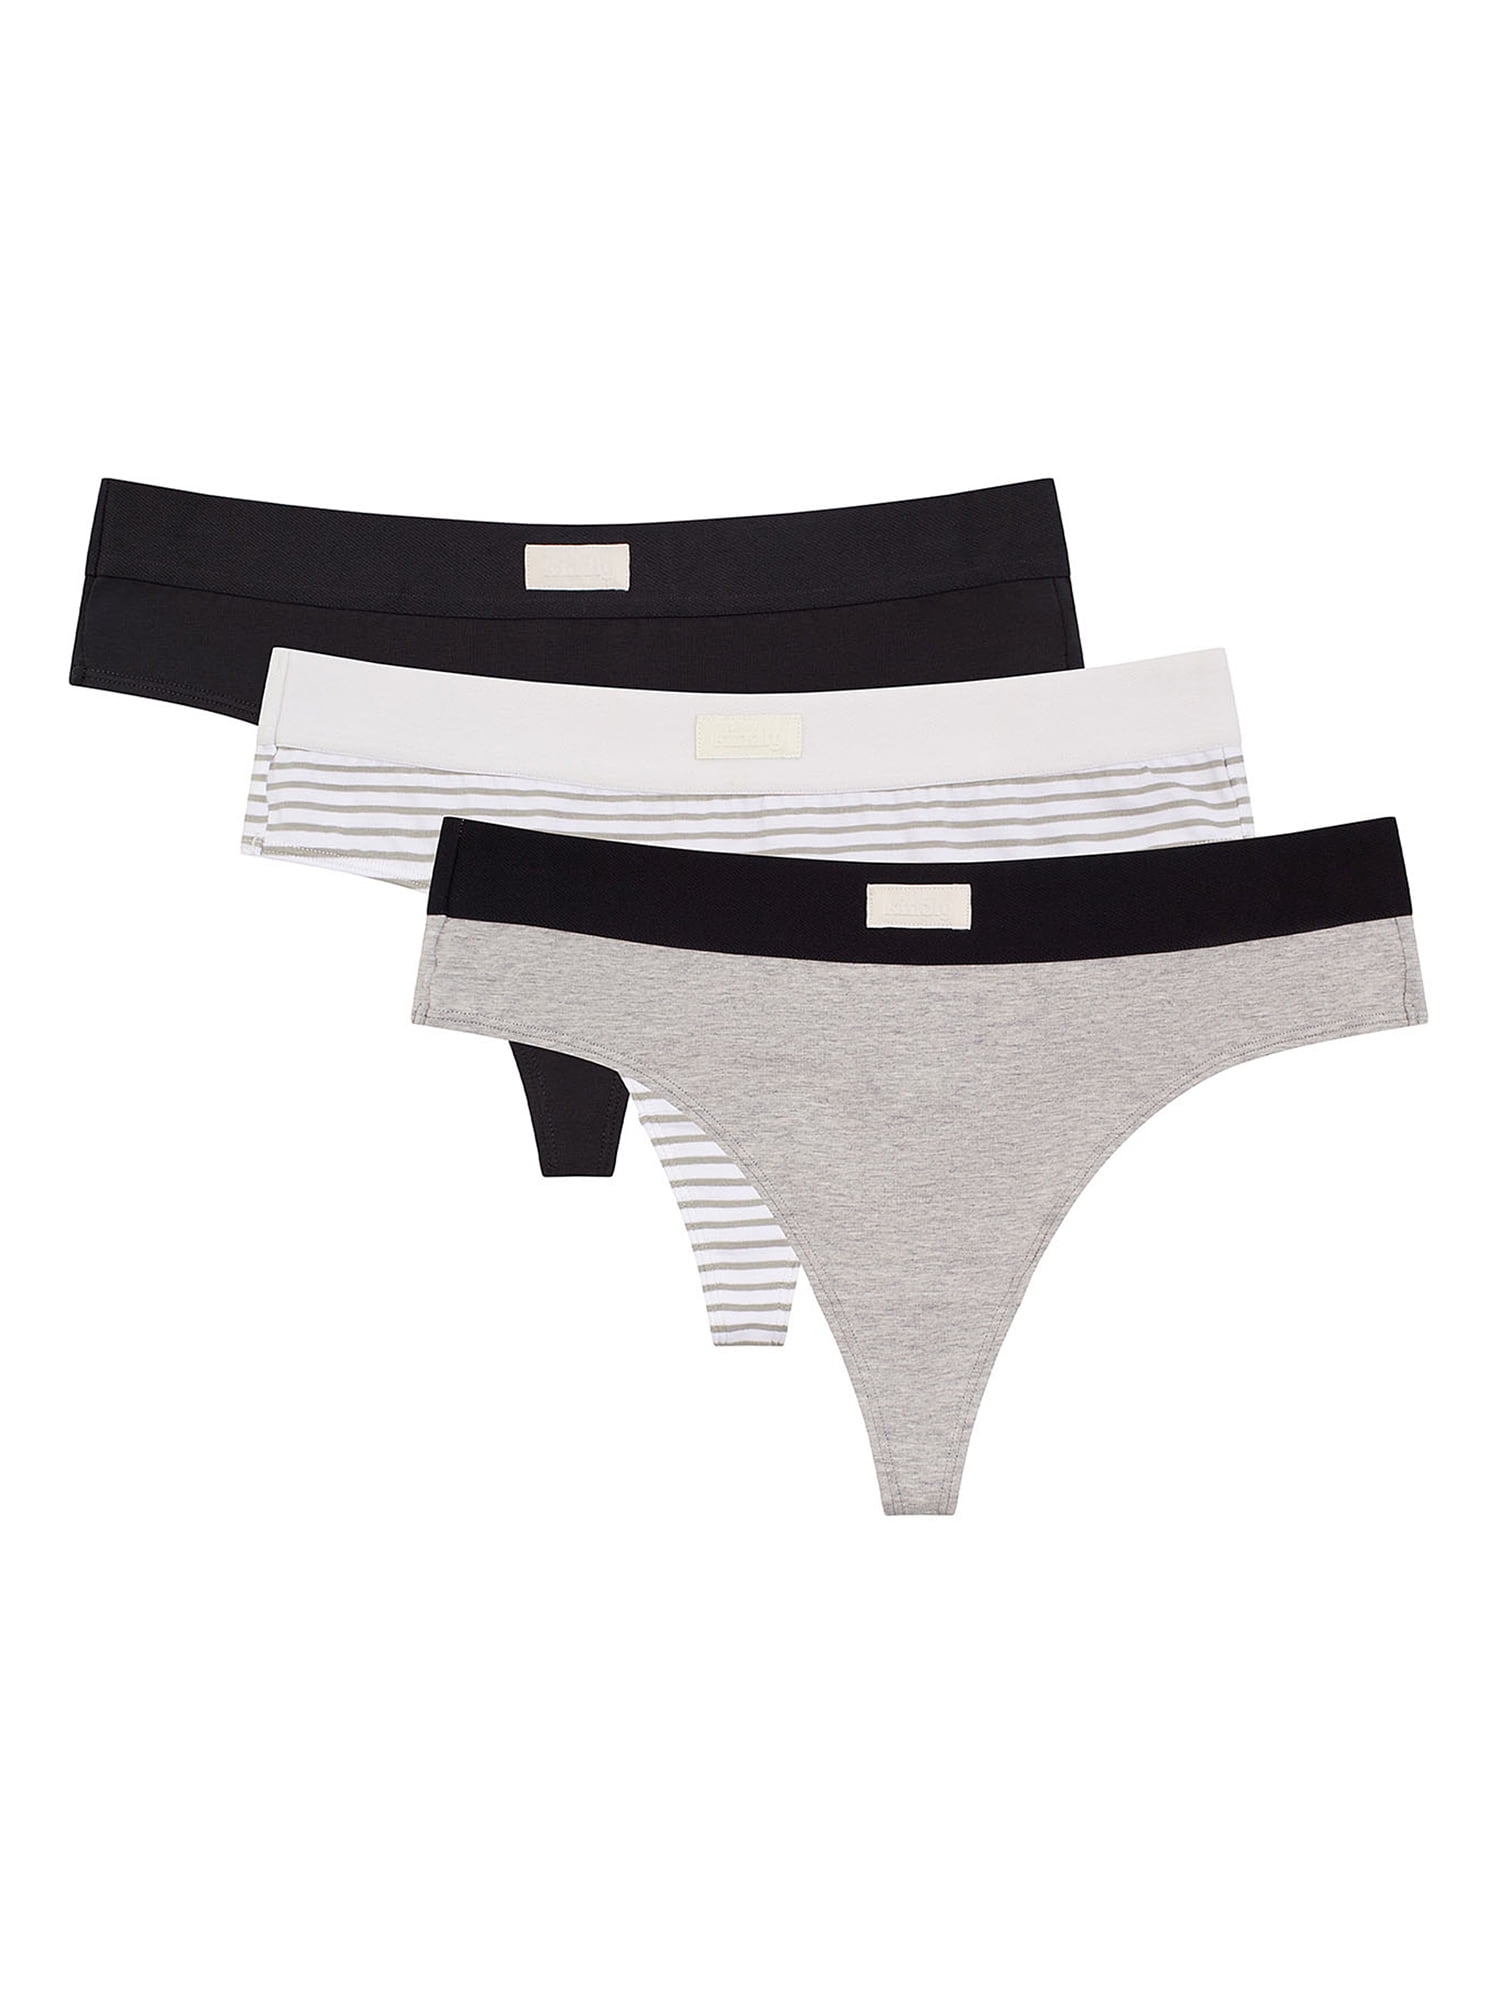 Kindly Yours Women's Sustainable Cotton Thong Underwear, 3-Pack, Sizes XS  to XXXL 